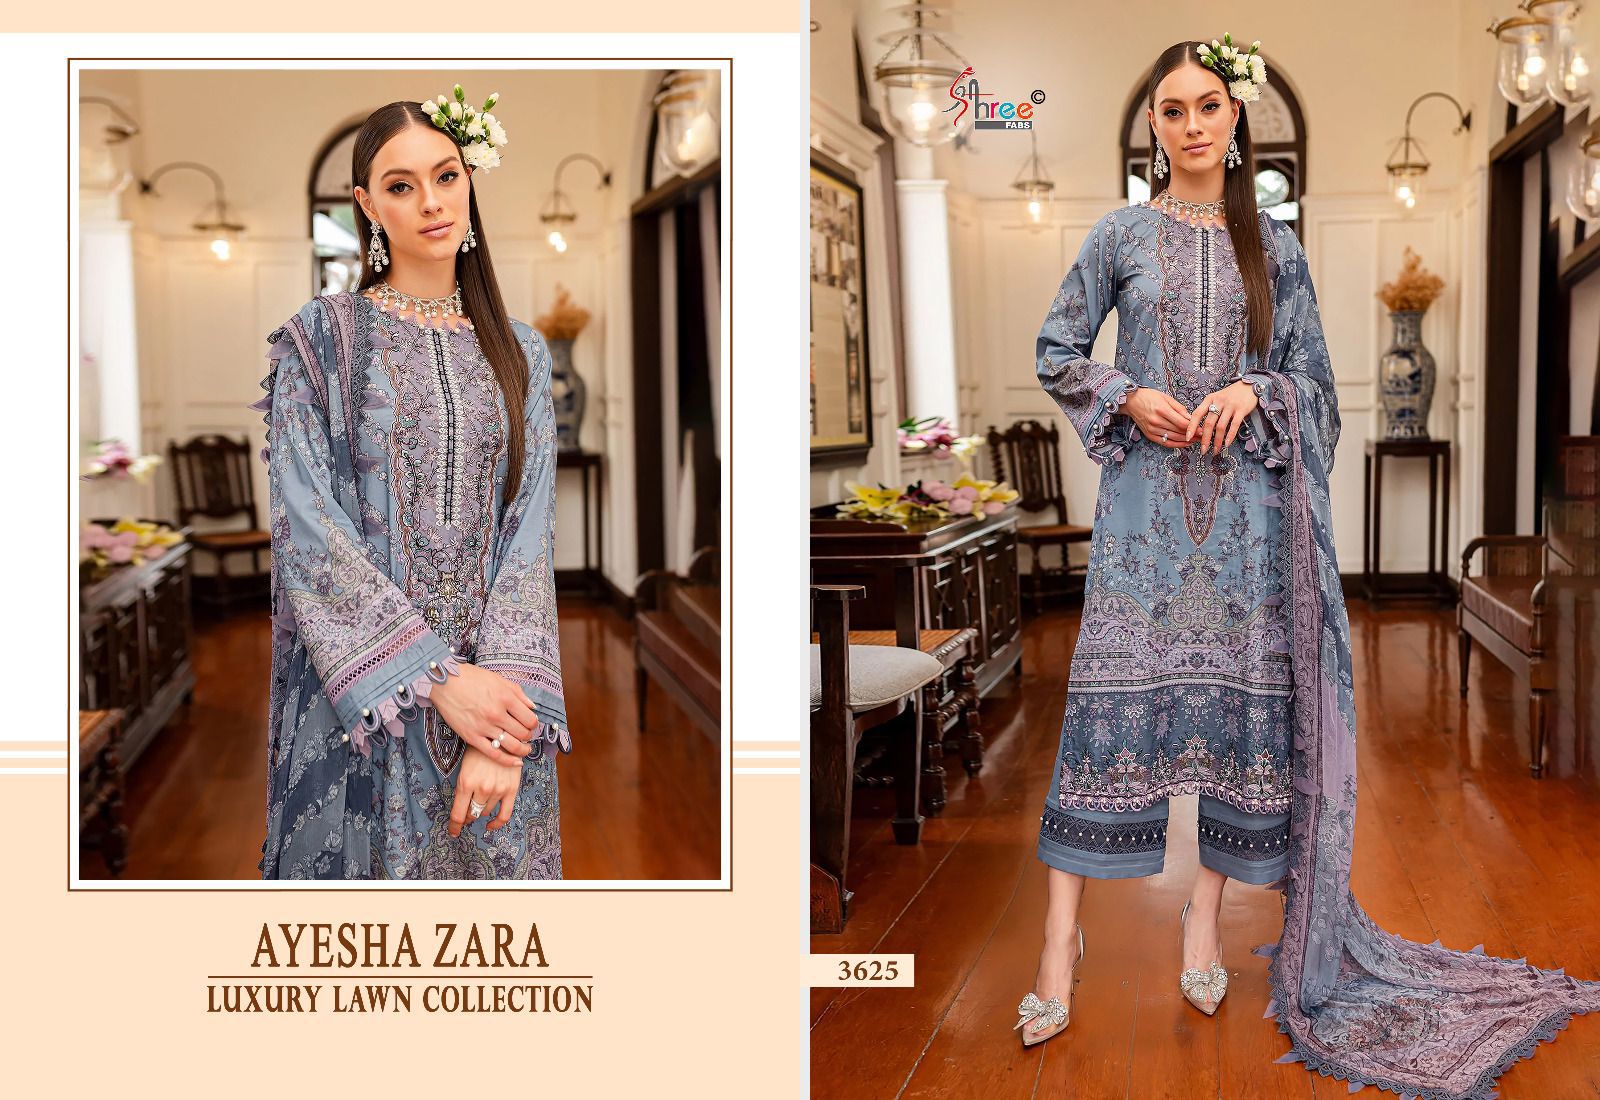 Ayesha Zara Luxury Lawn Collection Shree Fabs Pure Cotton Pakistani Patch Work Suits Exporter India